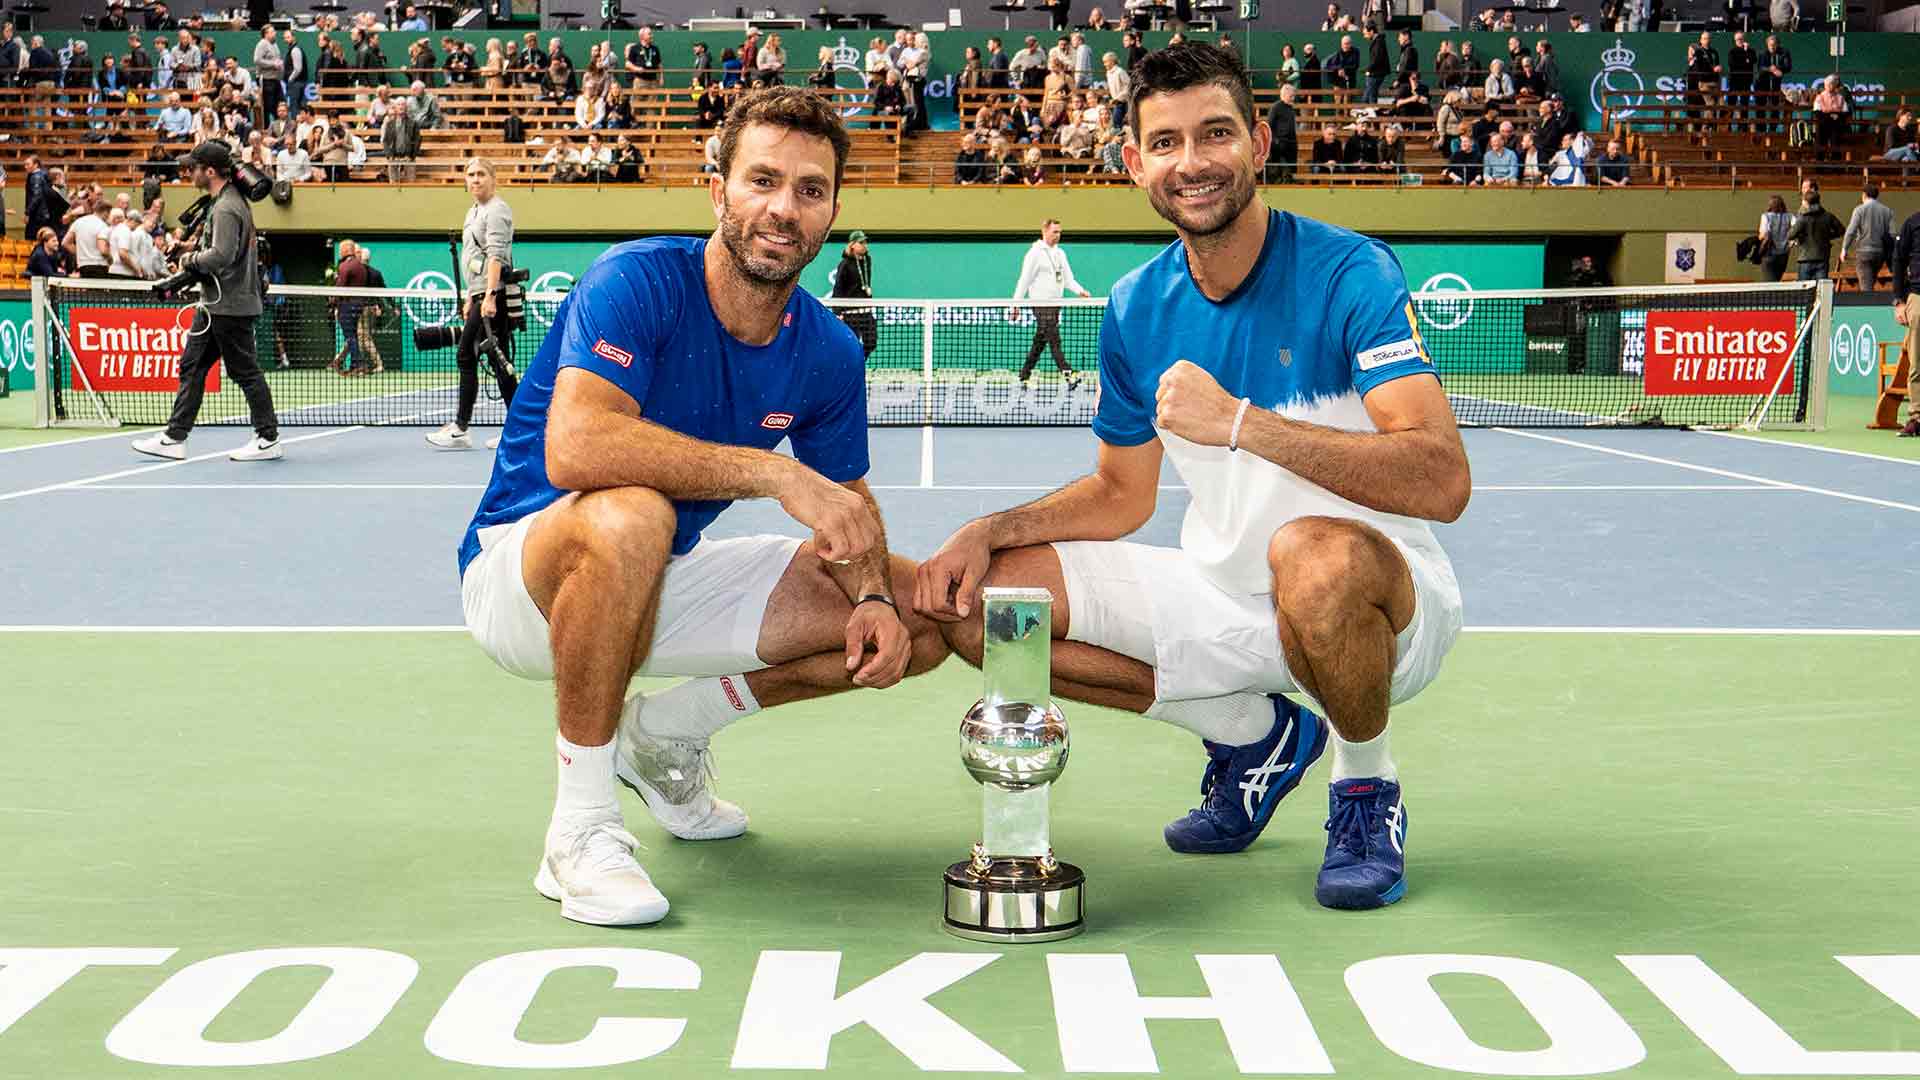 Jean-Julien Rojer and Marcelo Arevalo